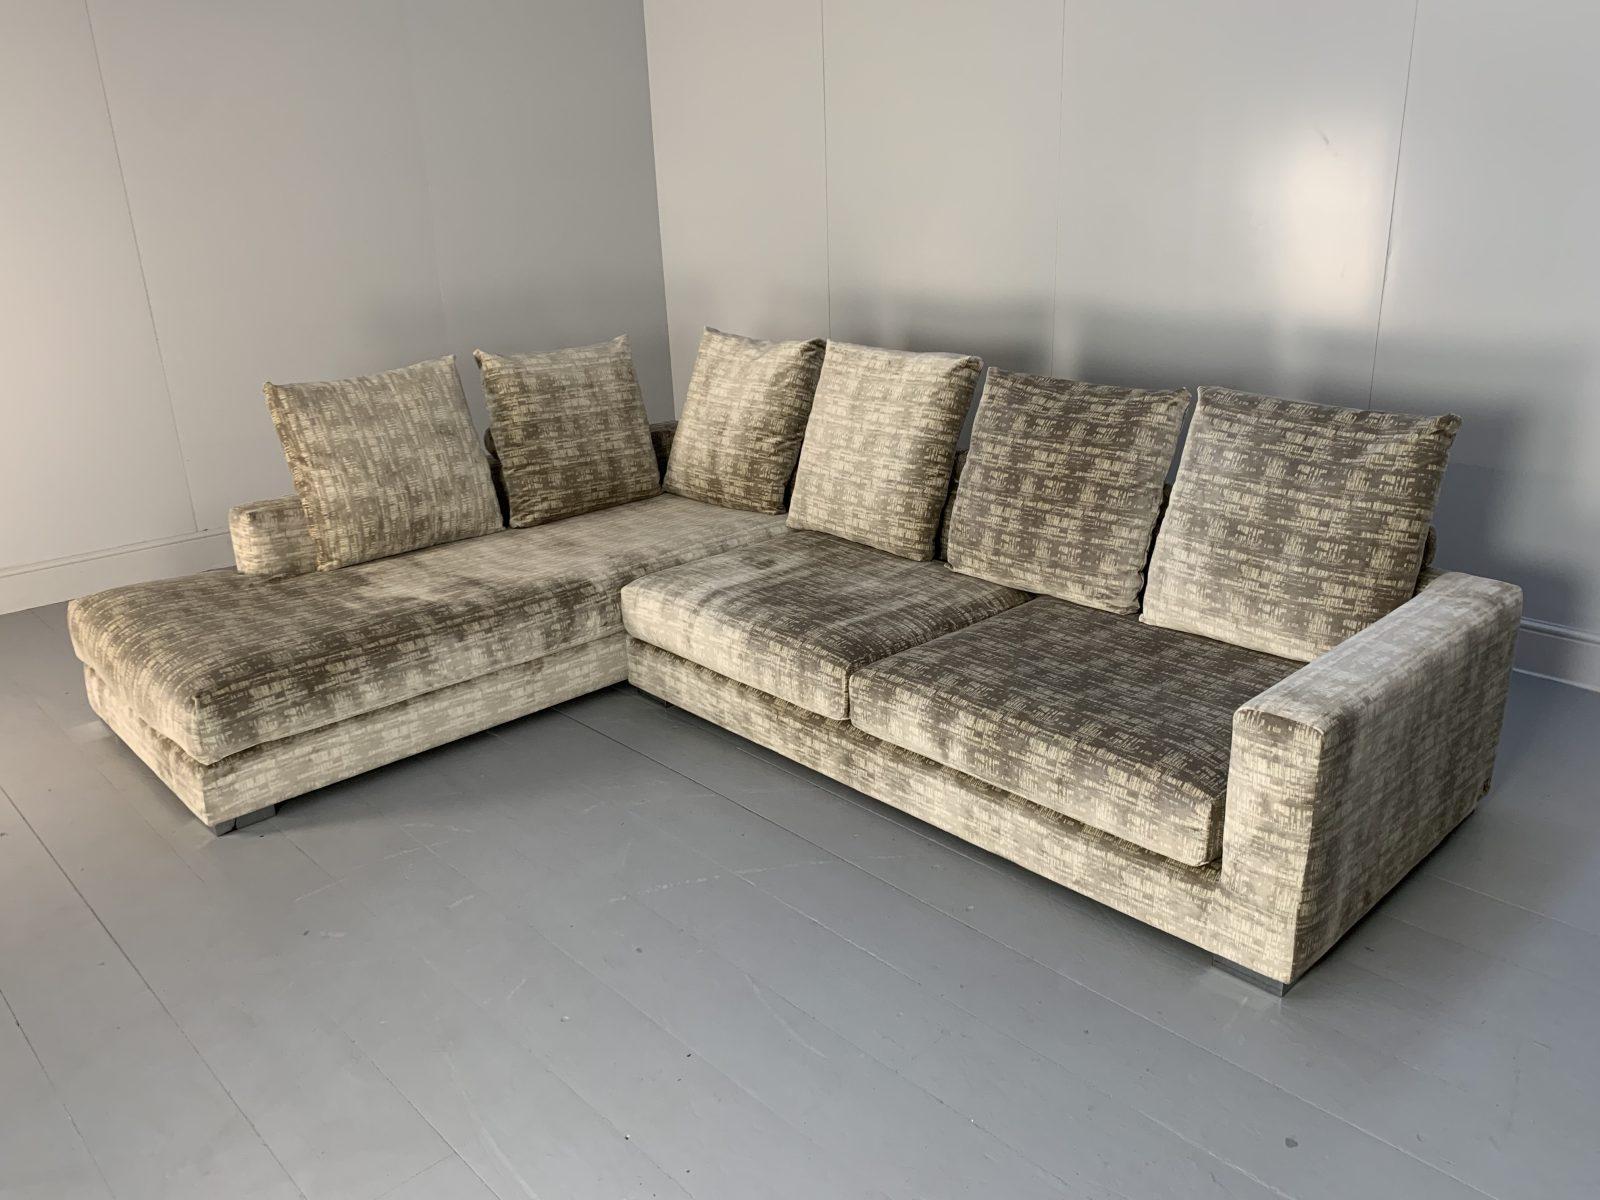 Hello Friends, and welcome to another unmissable offering from Lord Browns Furniture, the UK’s premier resource for fine Sofas and Chairs.

On offer on this occasion is an immaculate, superb, large 6-Seat L-shape Sofa from the world renown Italian